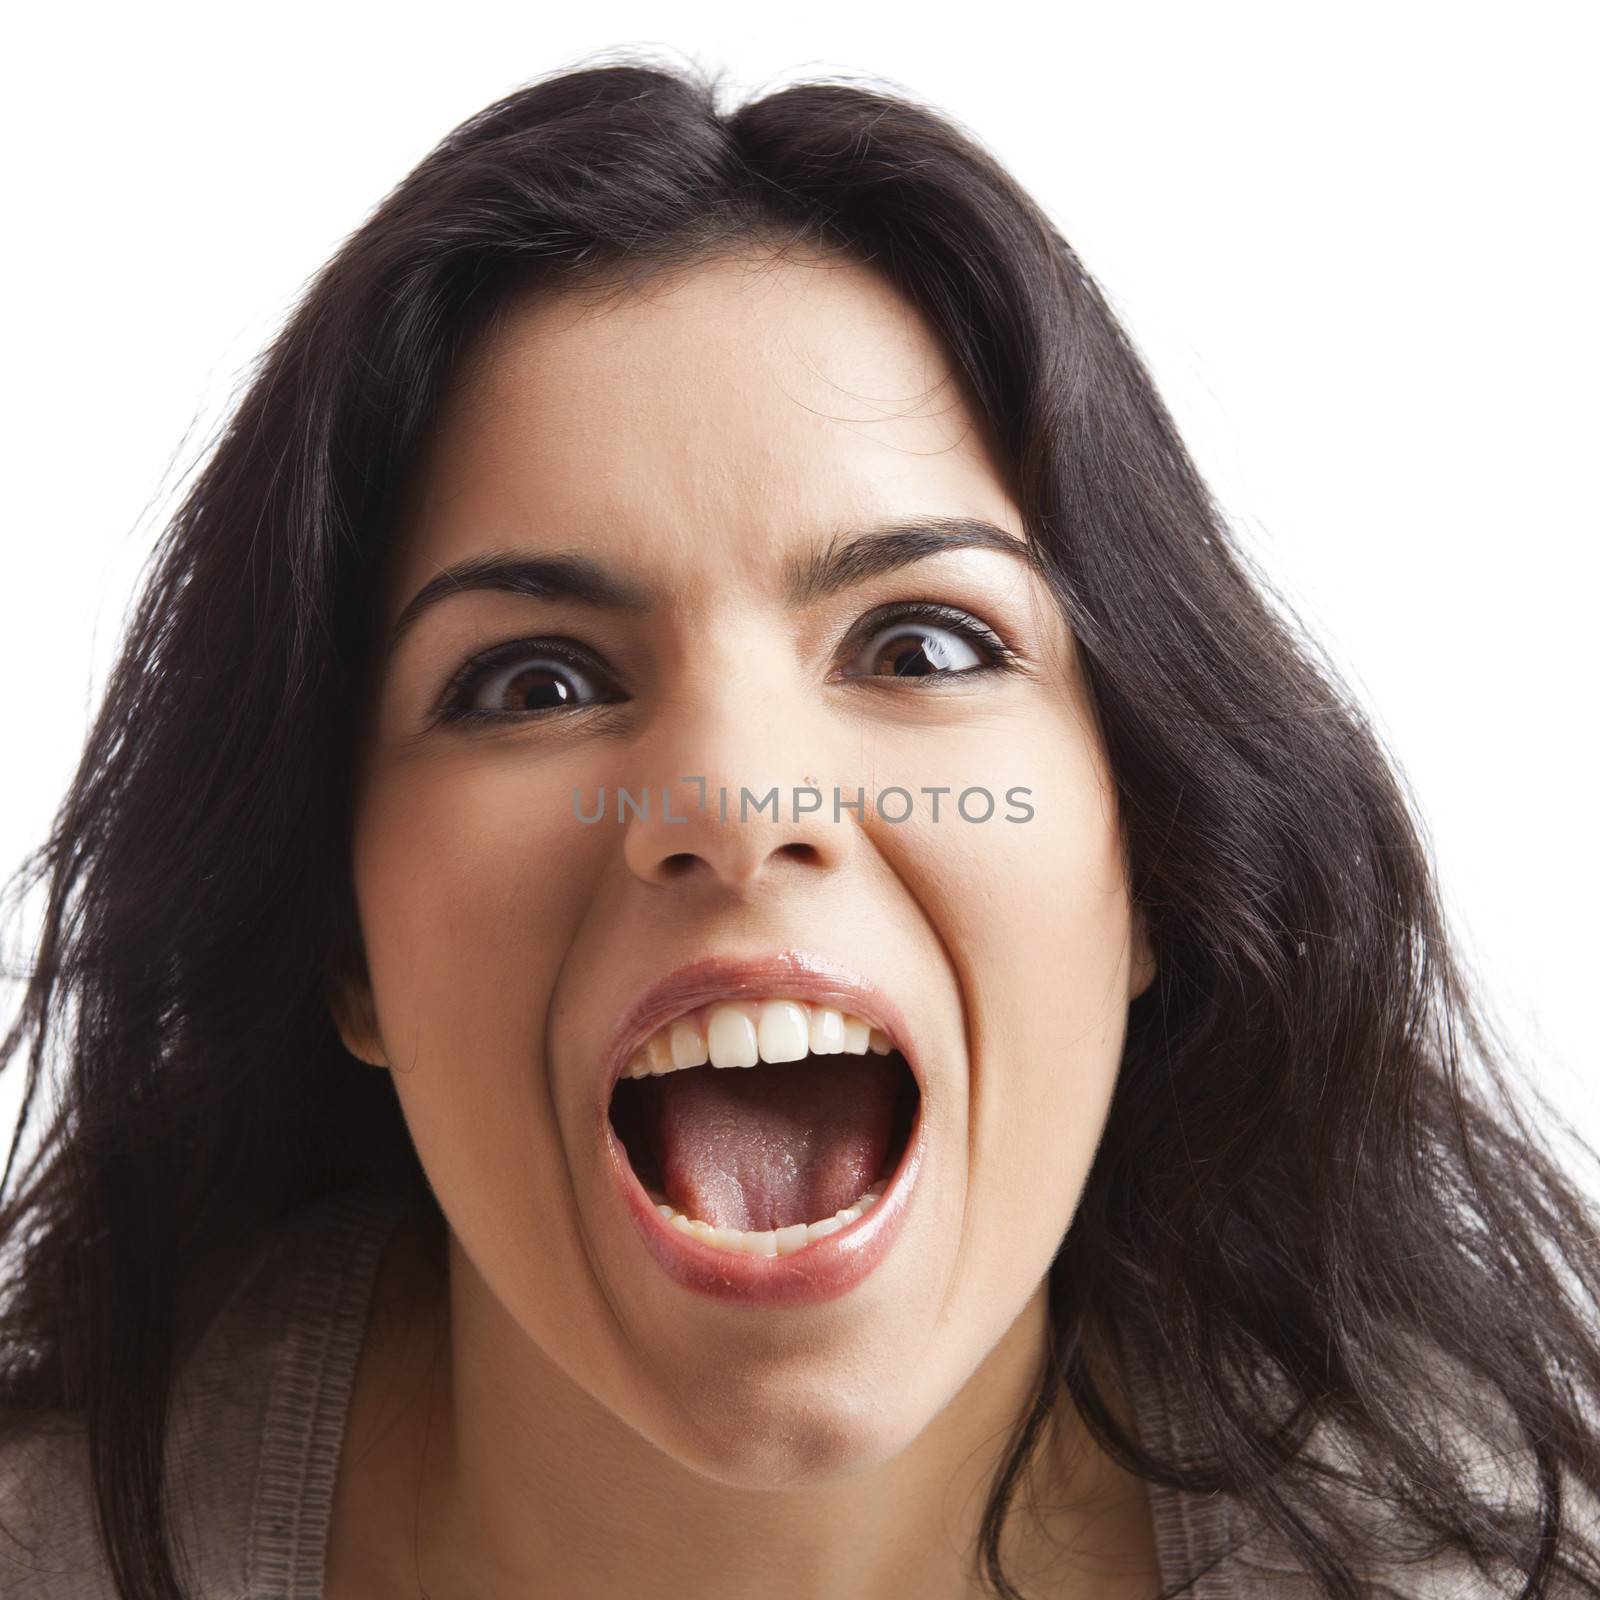 Portrait of a  young woman with a crazy expresion, isolated over white background